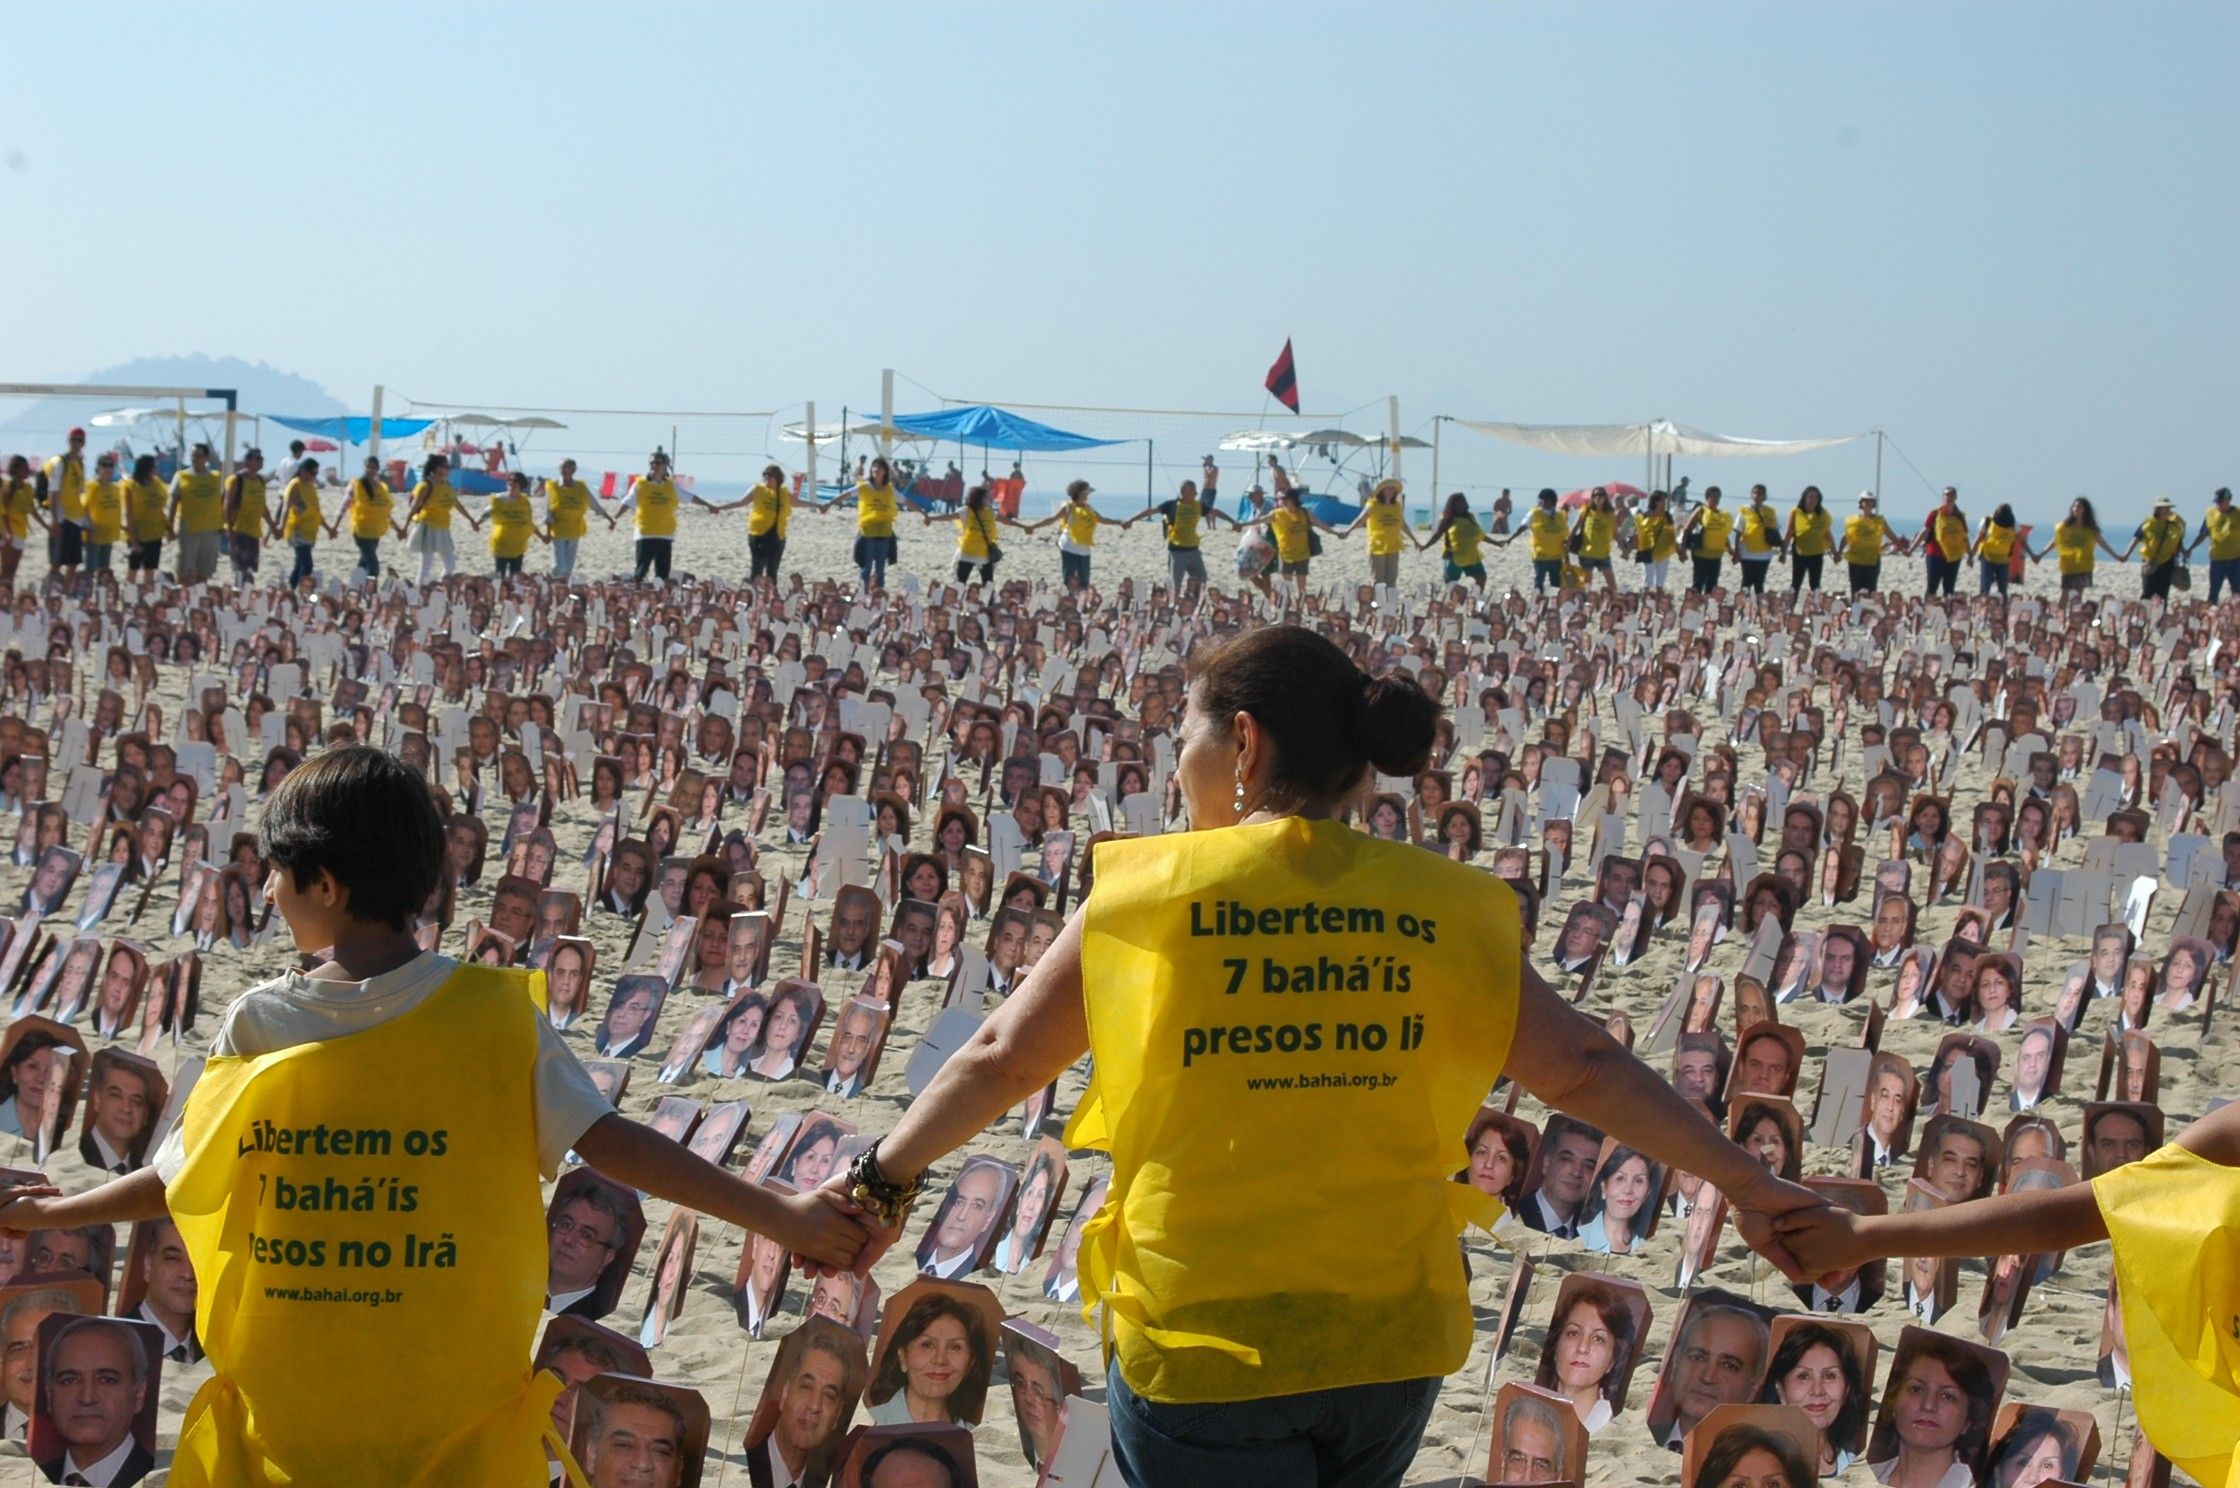 Rally_in_Rio_for_Religious_Freedom_5853608350